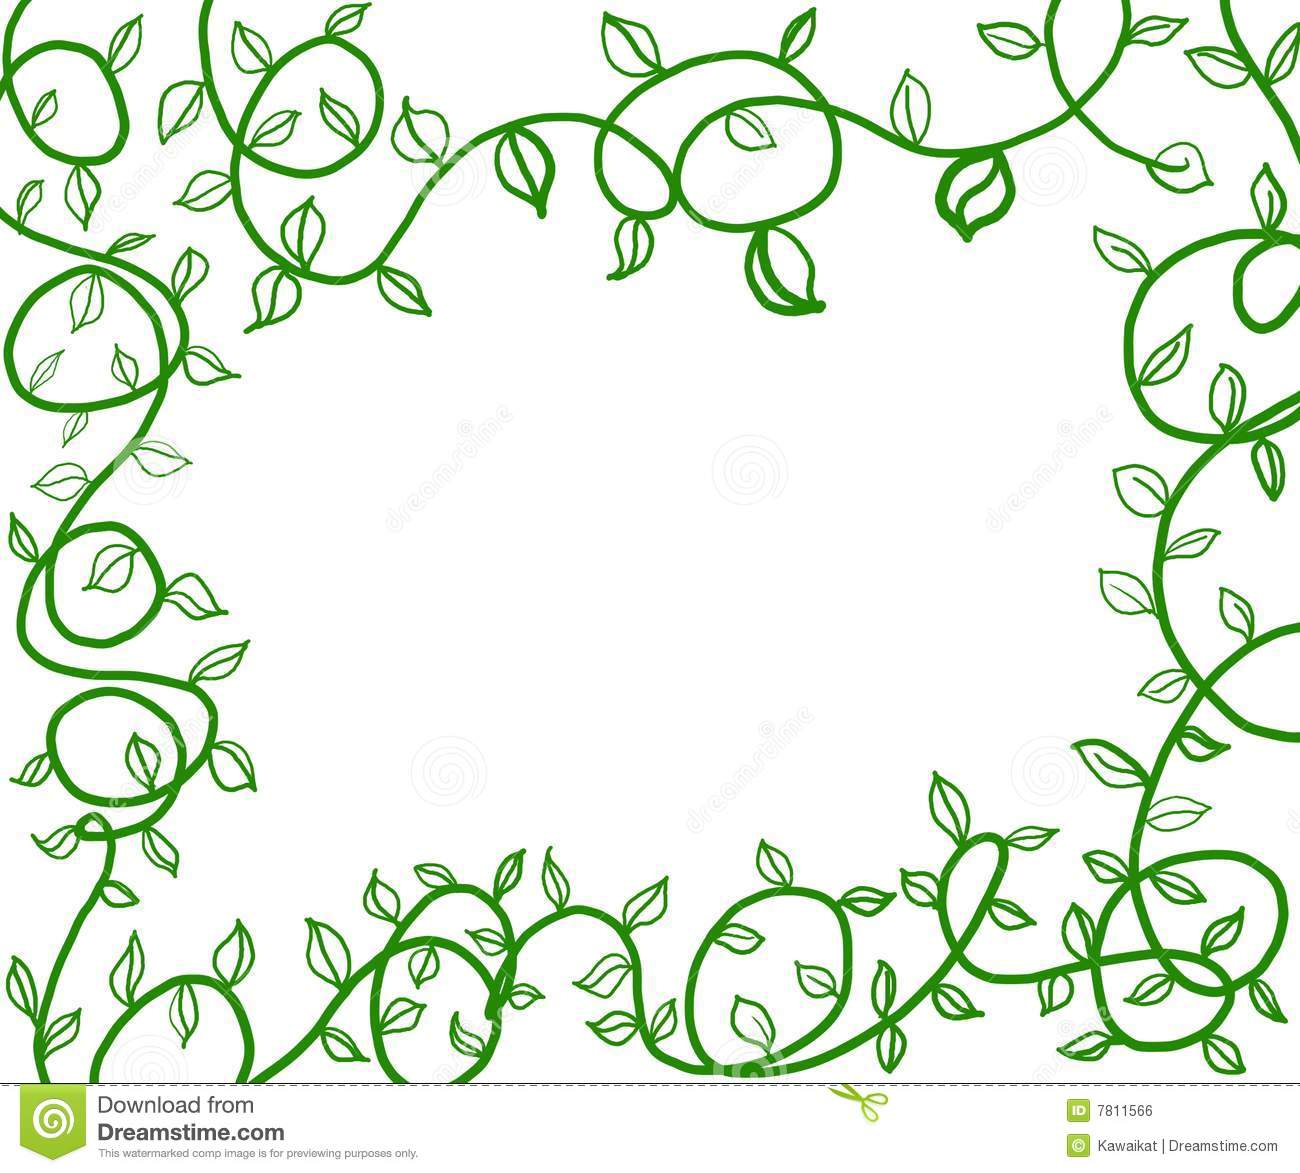 Green Vines Royalty Free Stock Image   Image  7811566